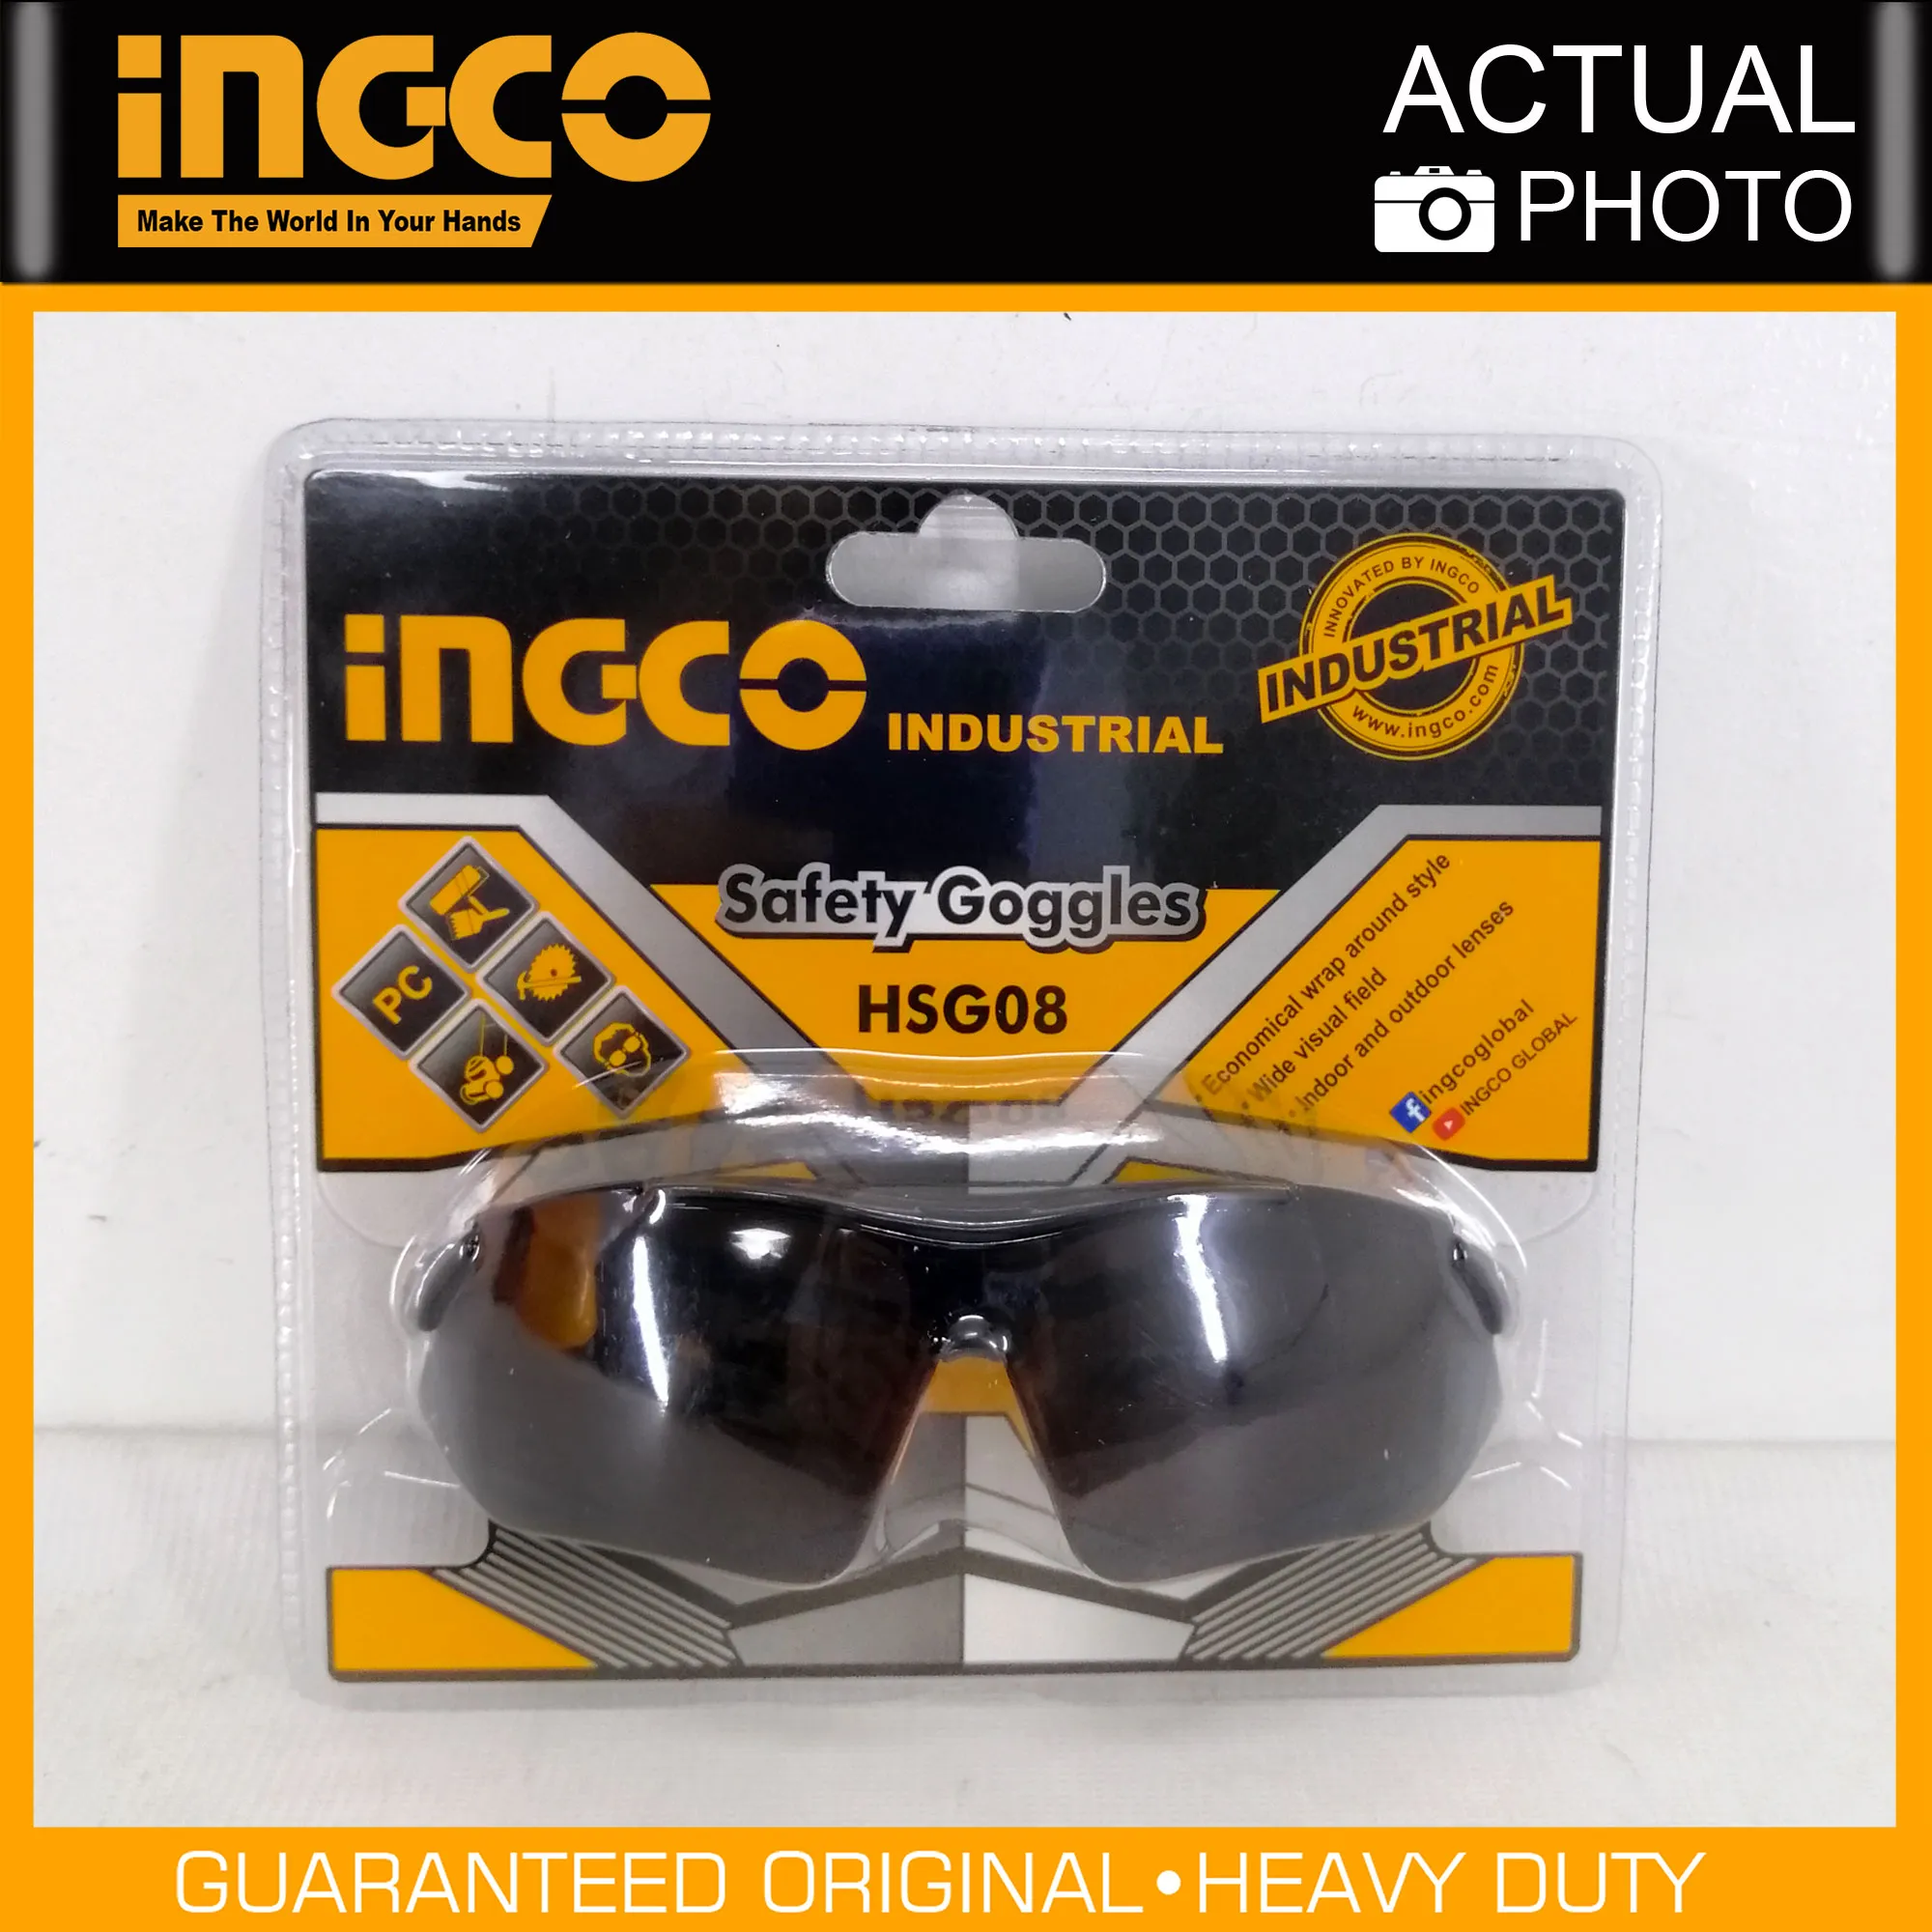 Ingco HSG08 Safety Goggles for Eye Protection Lightweight, Comfortable to Wear IHT